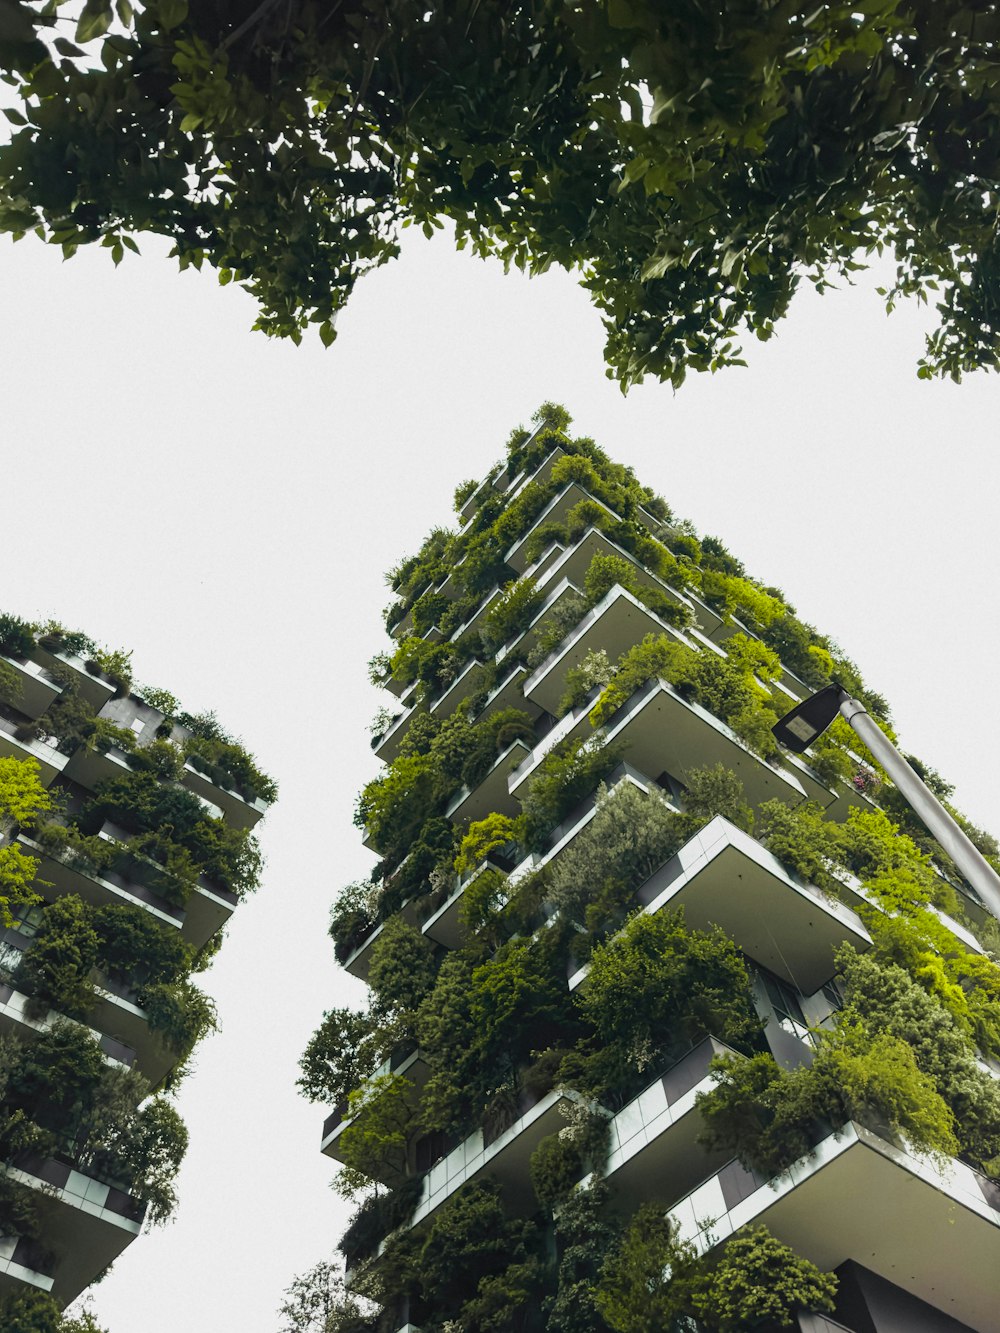 two tall buildings with plants growing on them